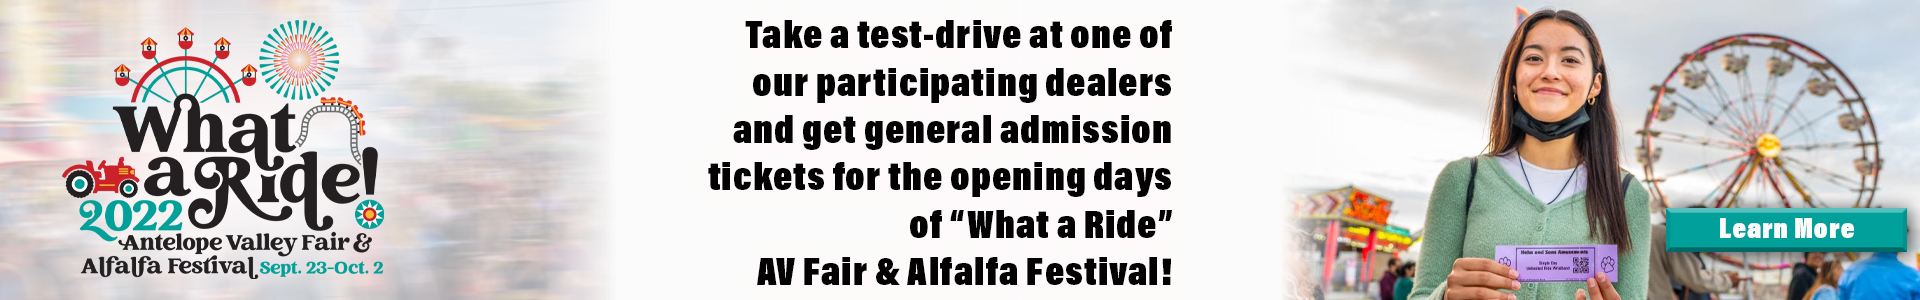 Free Tickets to the AV Fair from the Lancaster Auto Mall